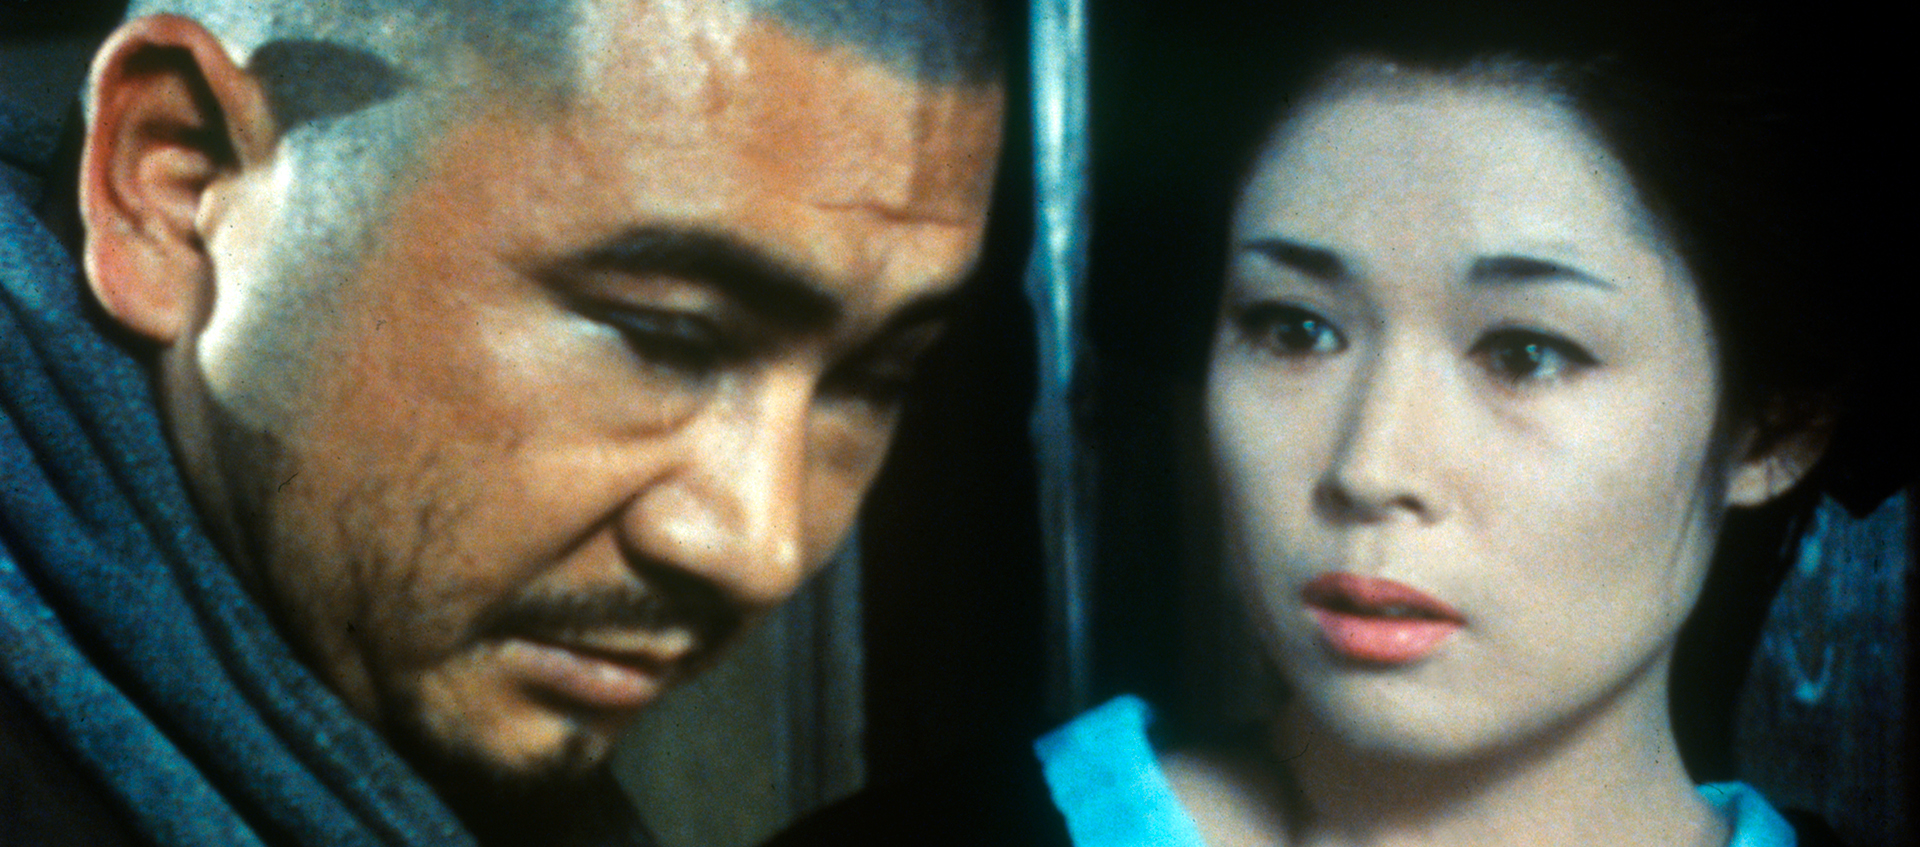 Still of a person with dark hair, pink lipstick, and a blue-lined kimono looking concernedly at a person with a shaved head and mustache whose head is pointed down and eyes are closed. 